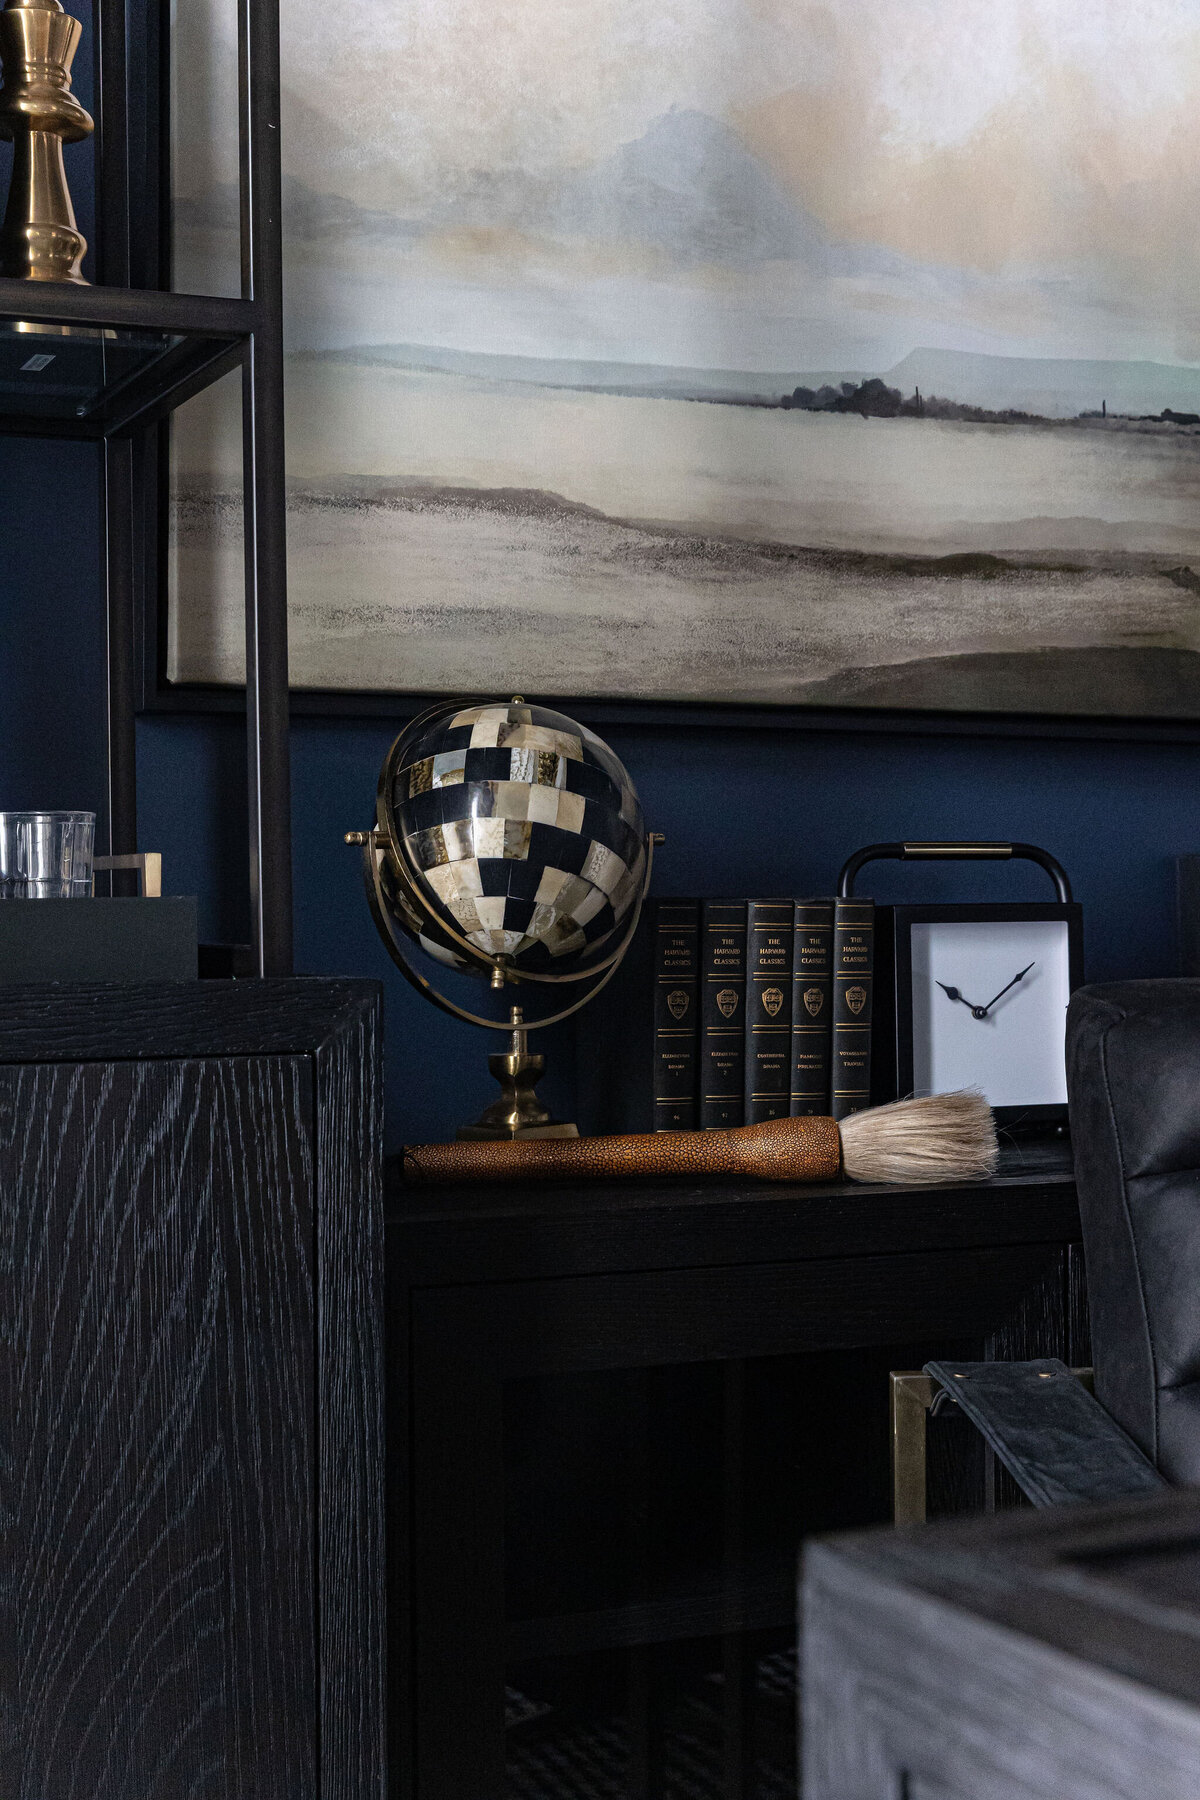 a globe, books, and a clock on a shelf in an office